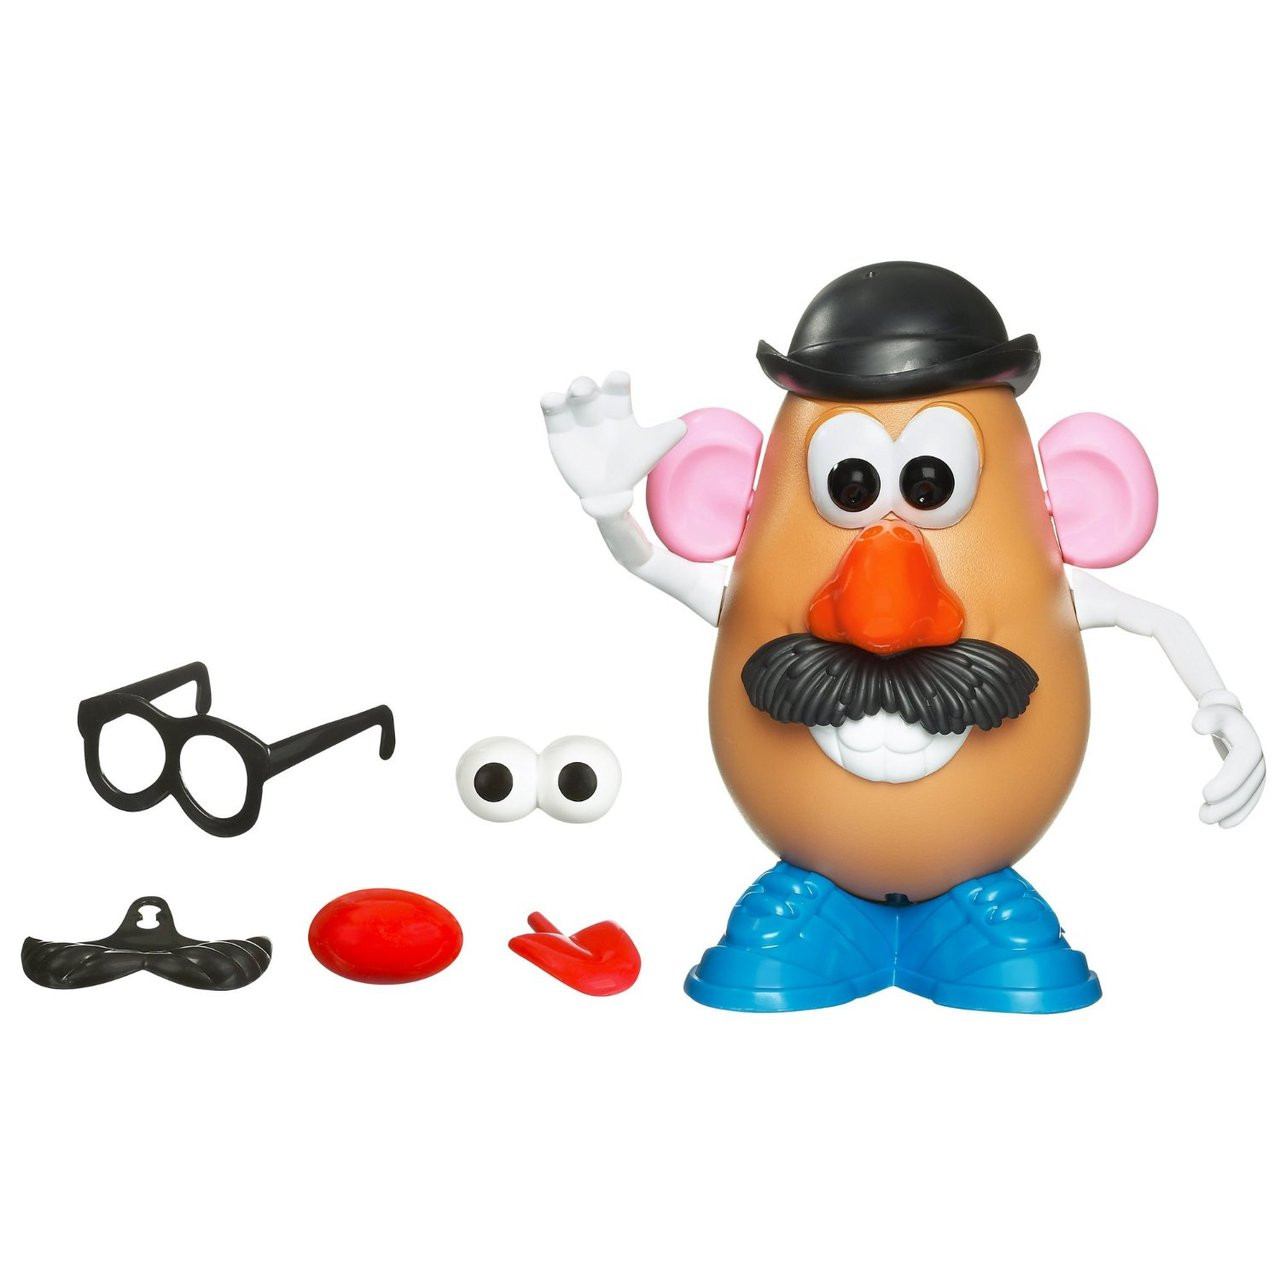 download mr and mrs potato head toys